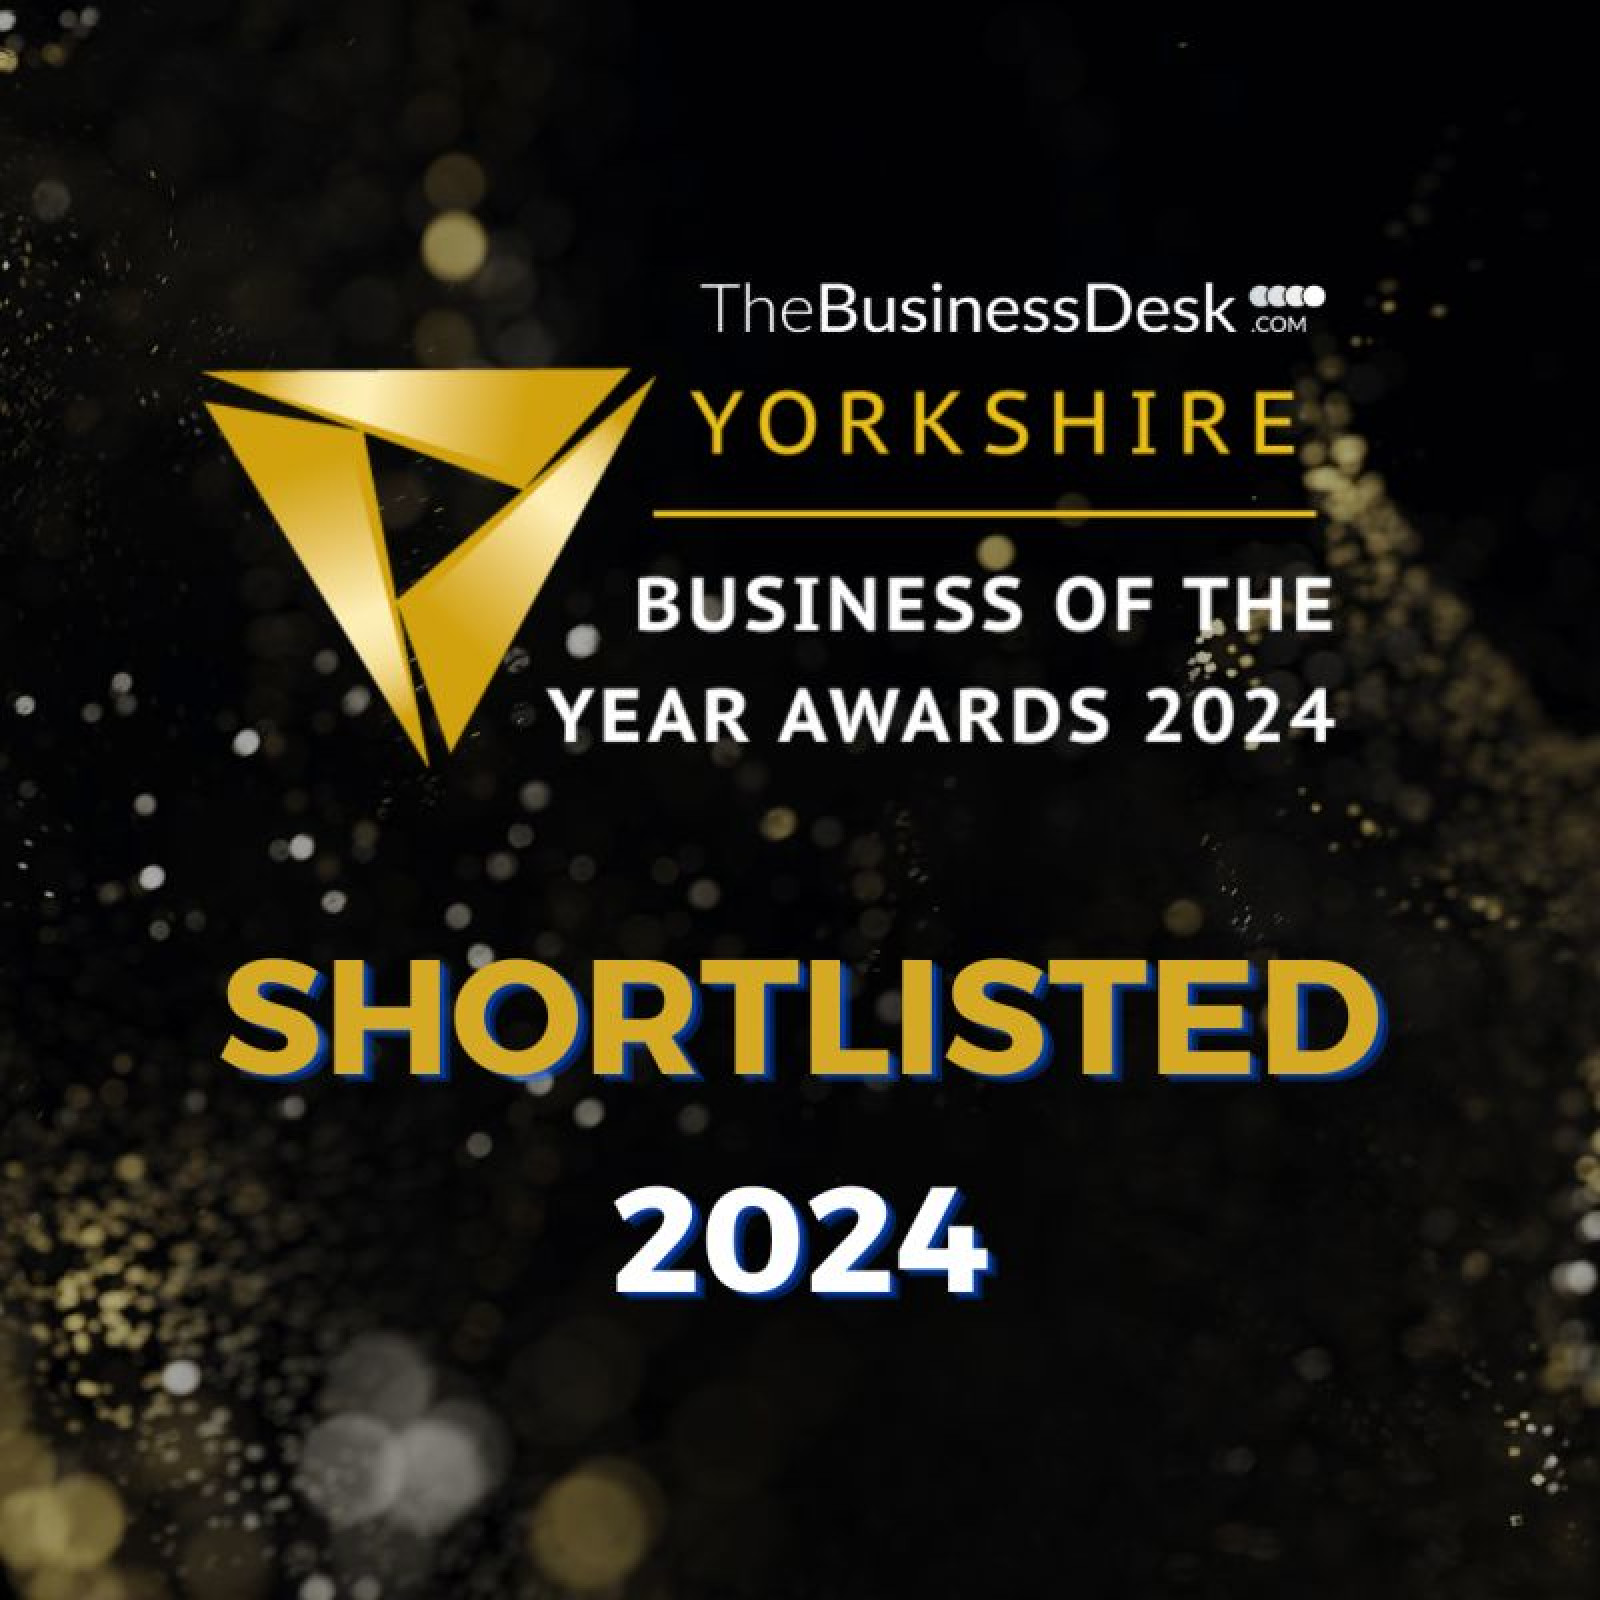 Yorkshire Business of the Year Awards